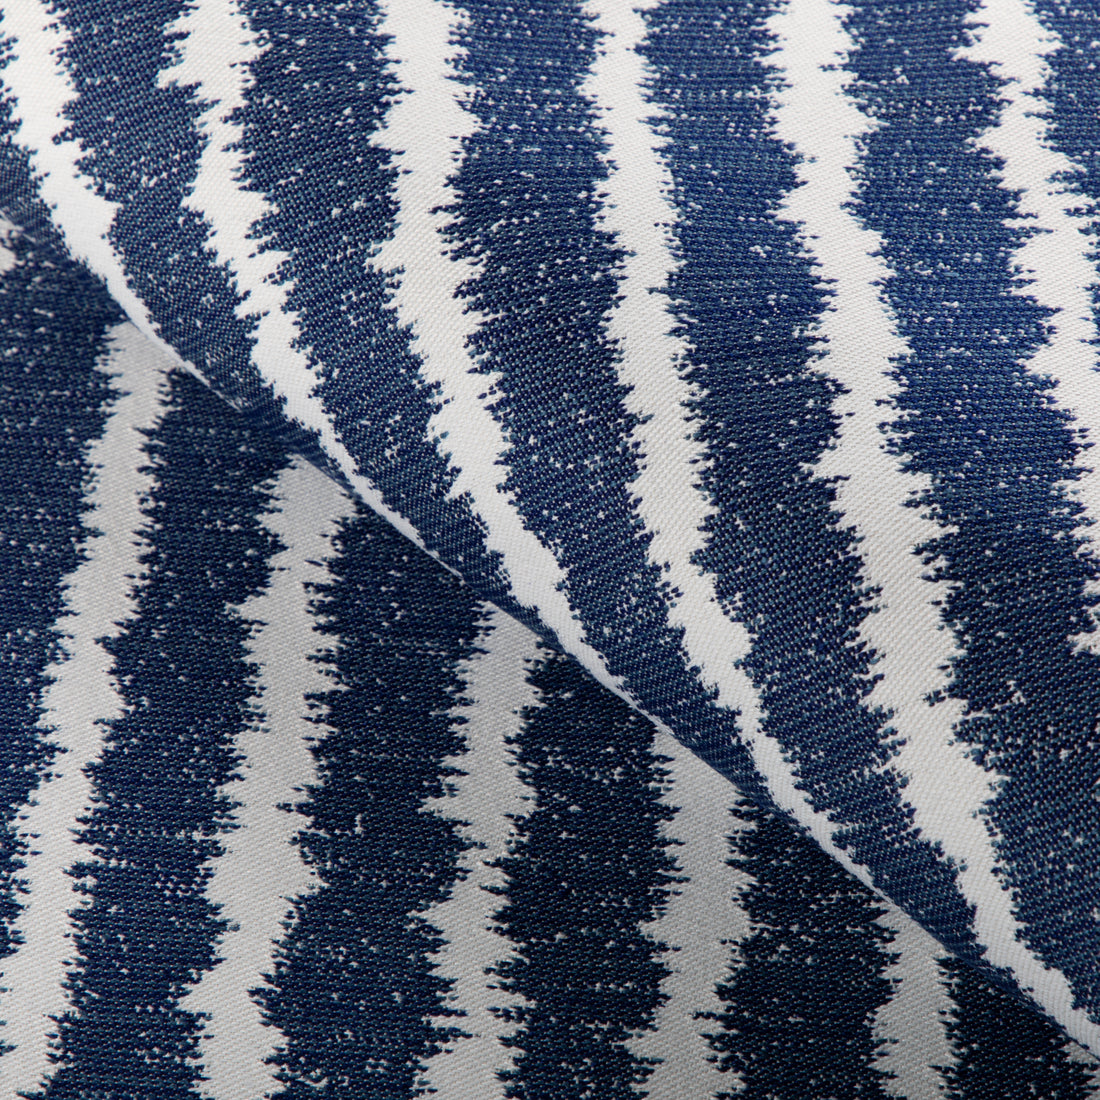 Seaport Stripe fabric in marine color - pattern 36917.5.0 - by Kravet Couture